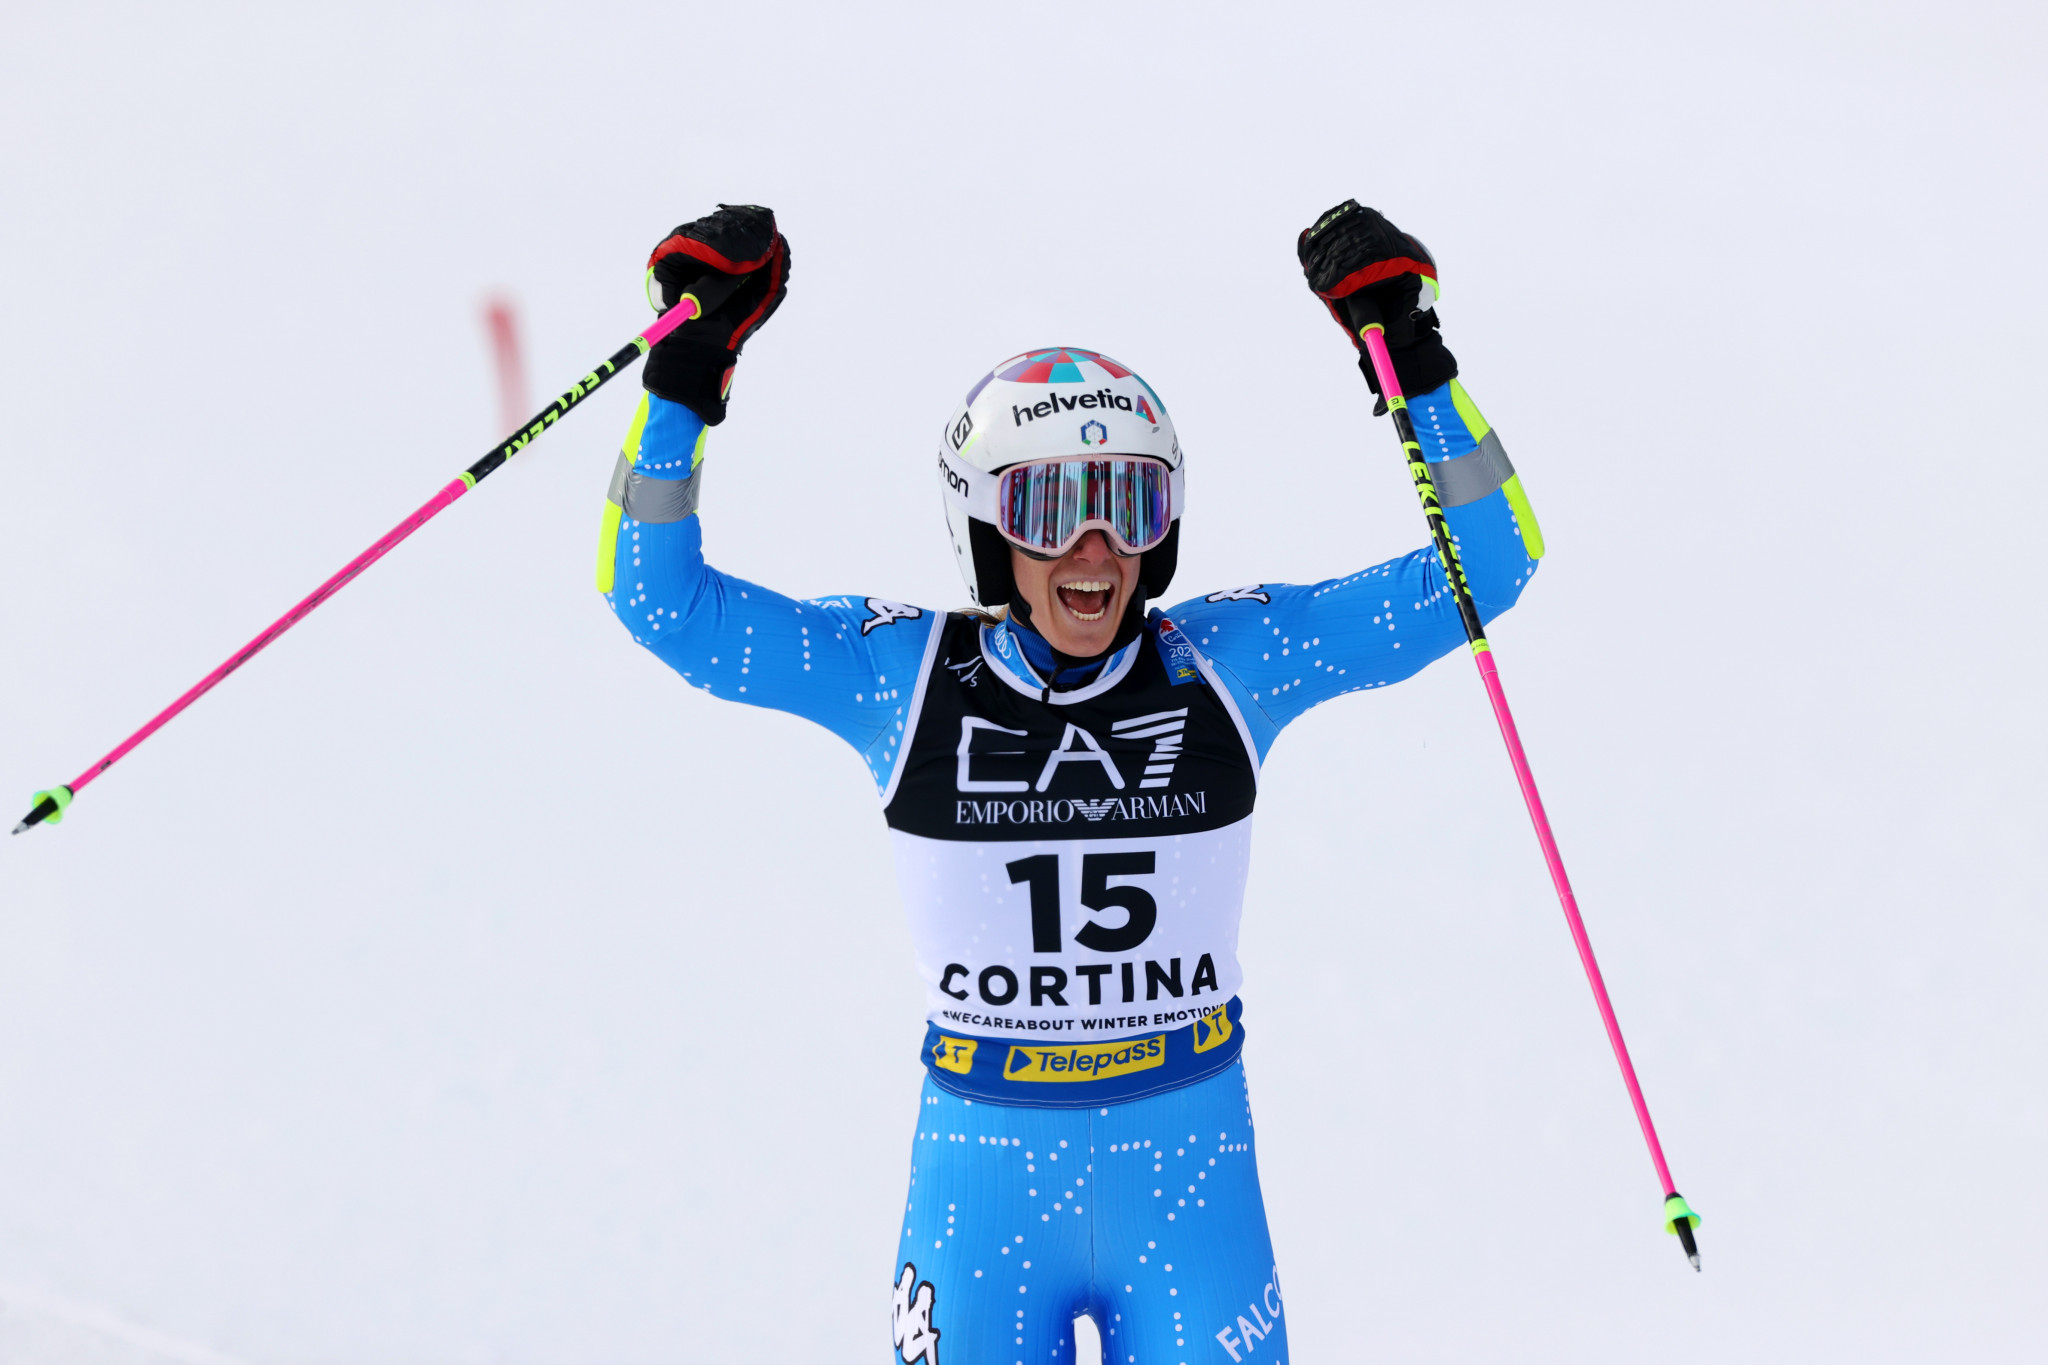 Marta Bassino earned Italy's first gold medal of the FIS Alpine Ski World Championships ©Getty Images